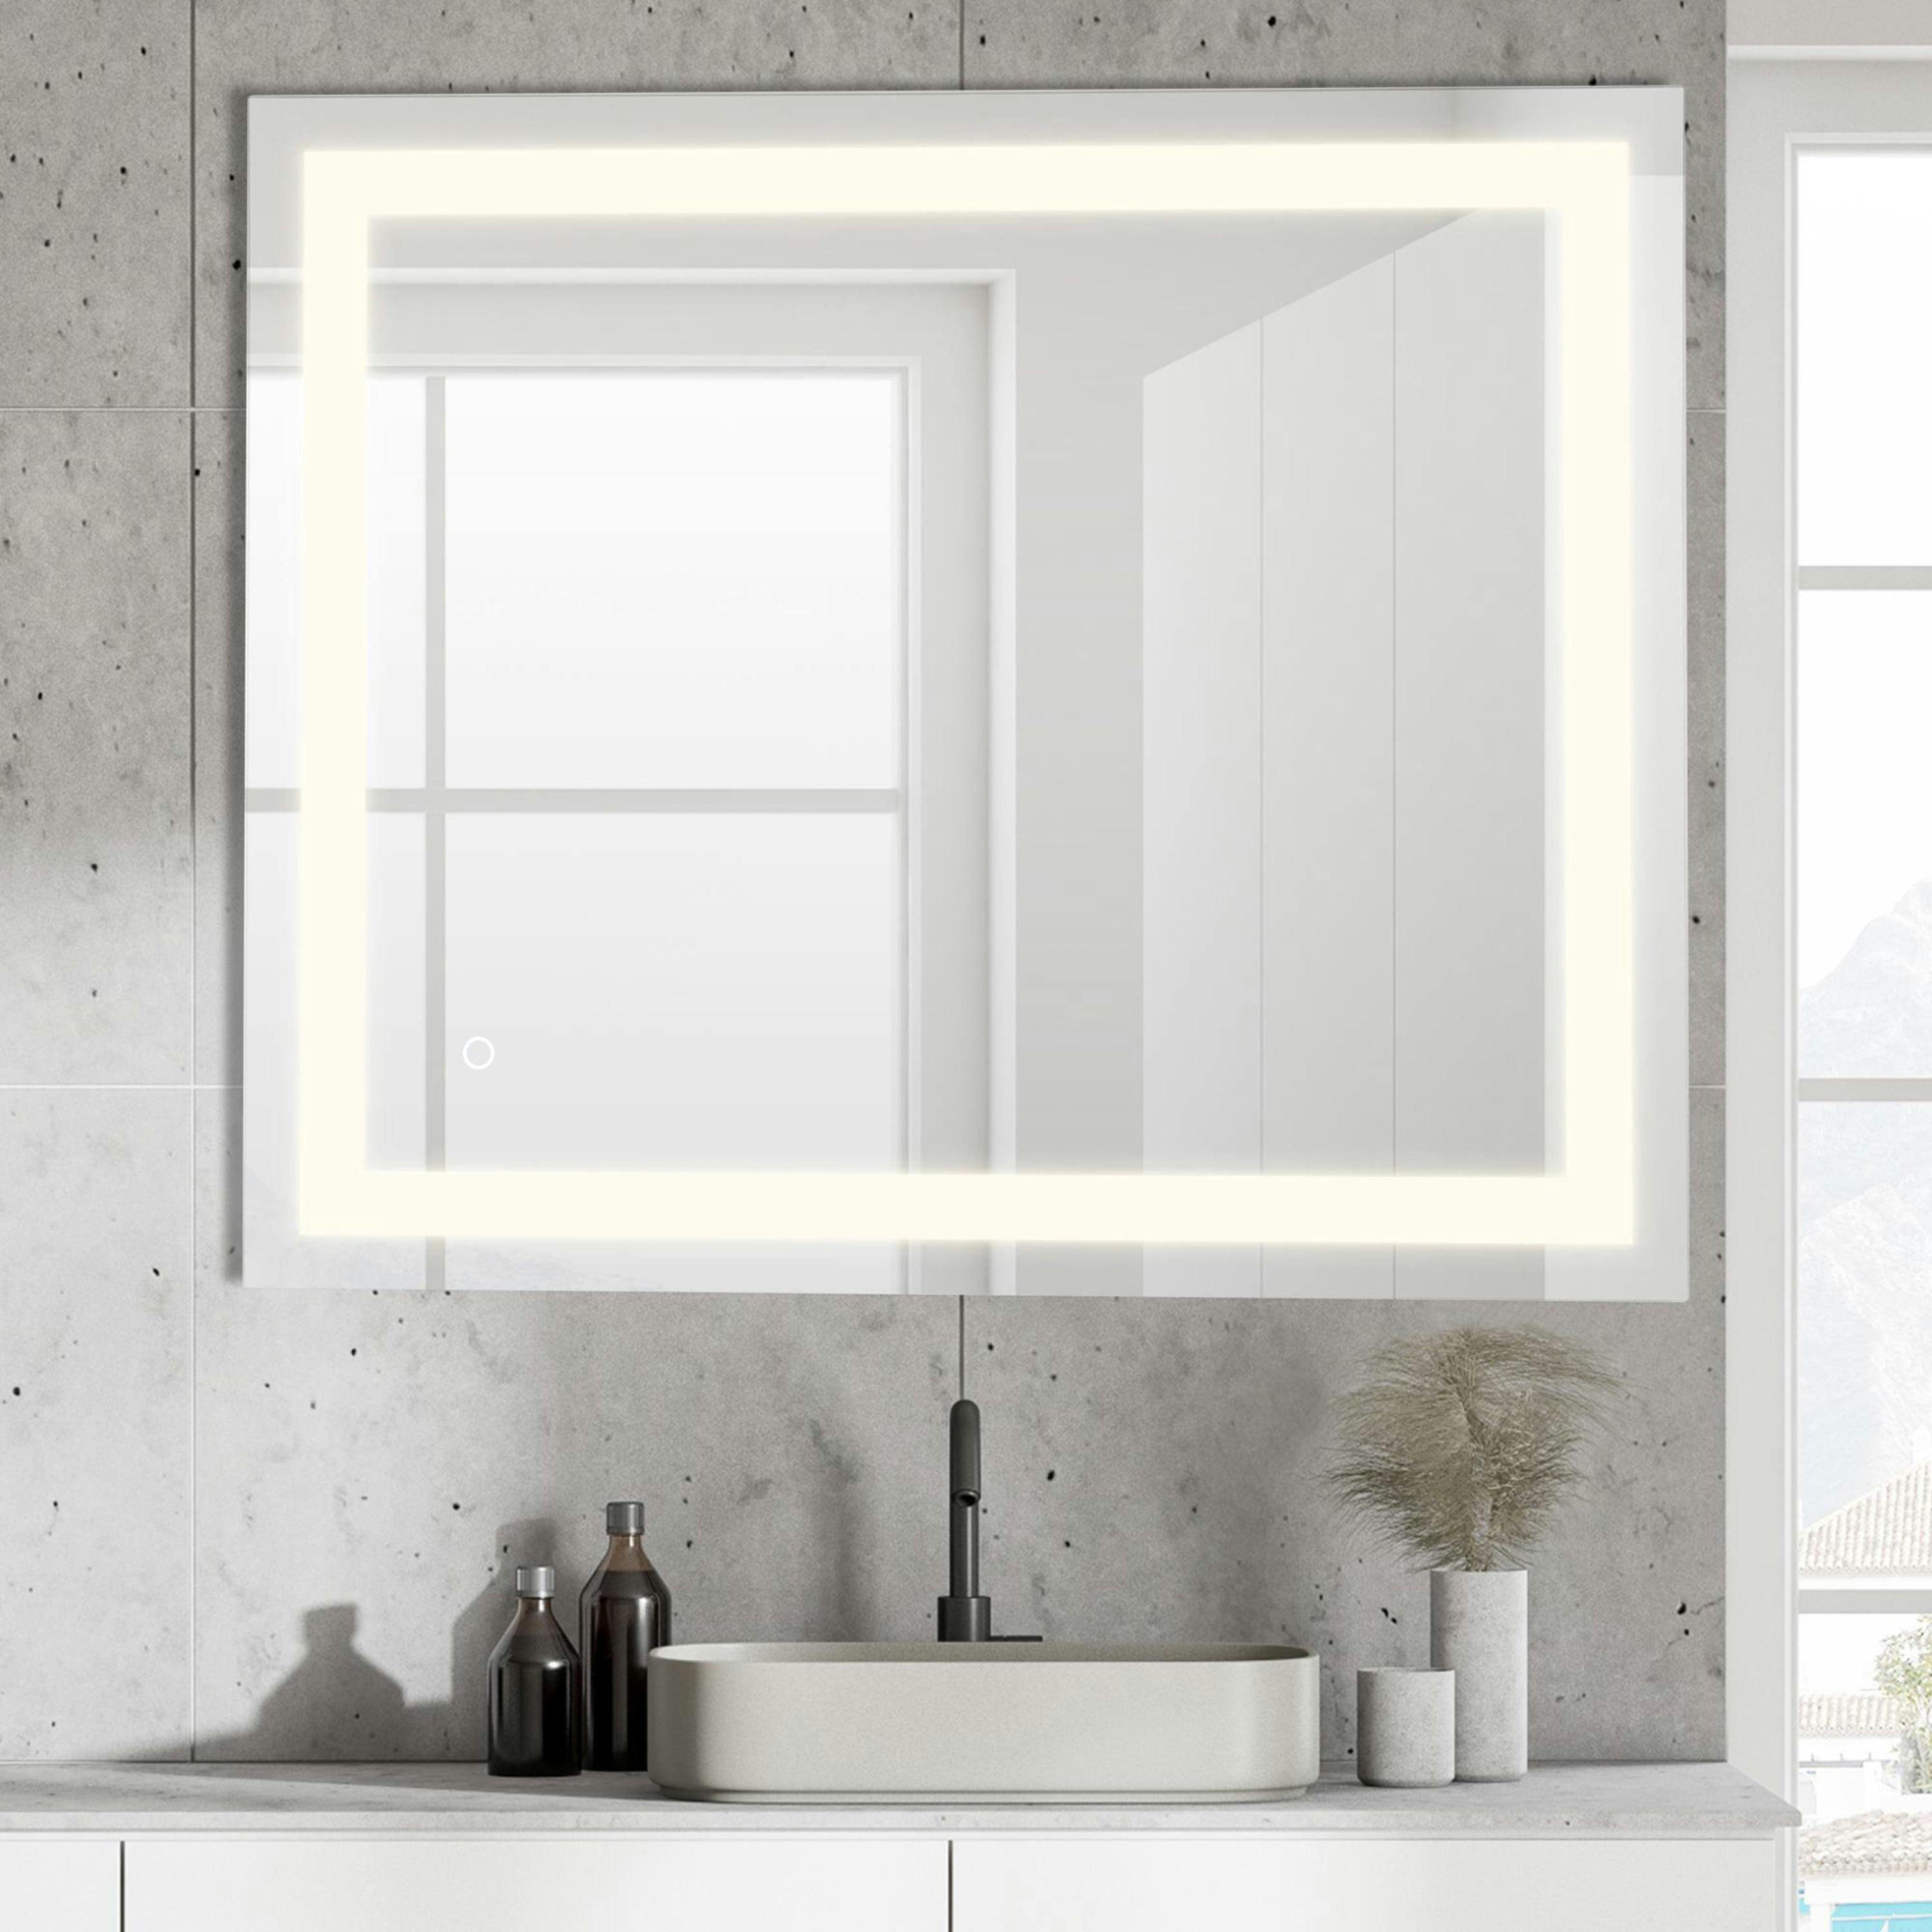 Remy 34.6" x 40.2" Anti-Fog Aluminum LED Bathroom Vanity Mirror with Smart Touch